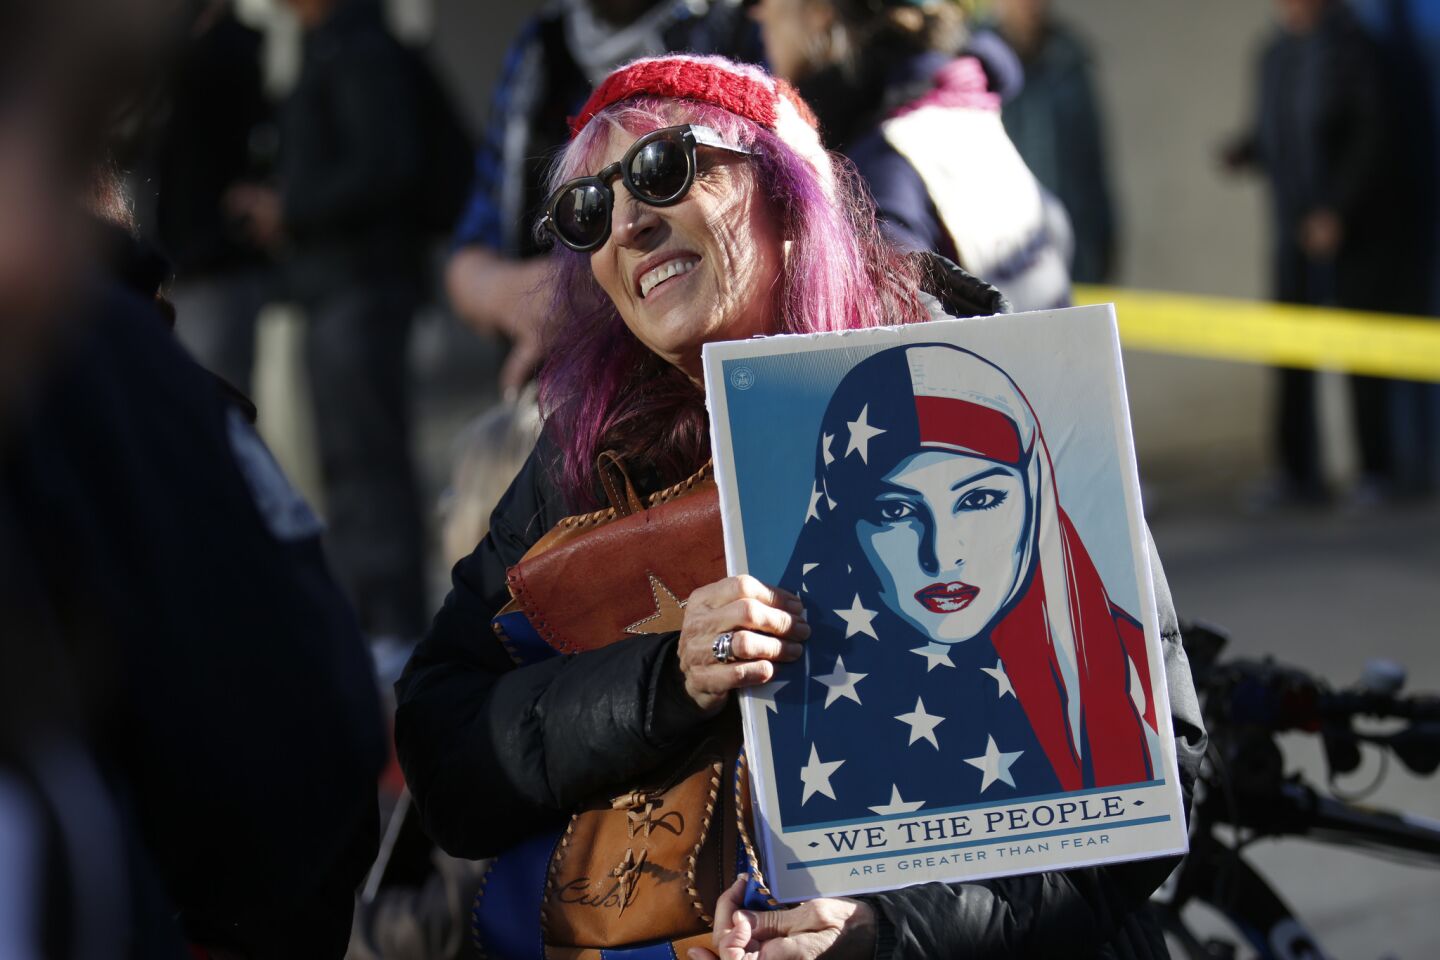 Marilyn Frandsen, 69, of Los Angeles was among those participating in the march for women's rights in Los Angeles on Saturday. Organizers said the event was a celebration of diversity and human rights.